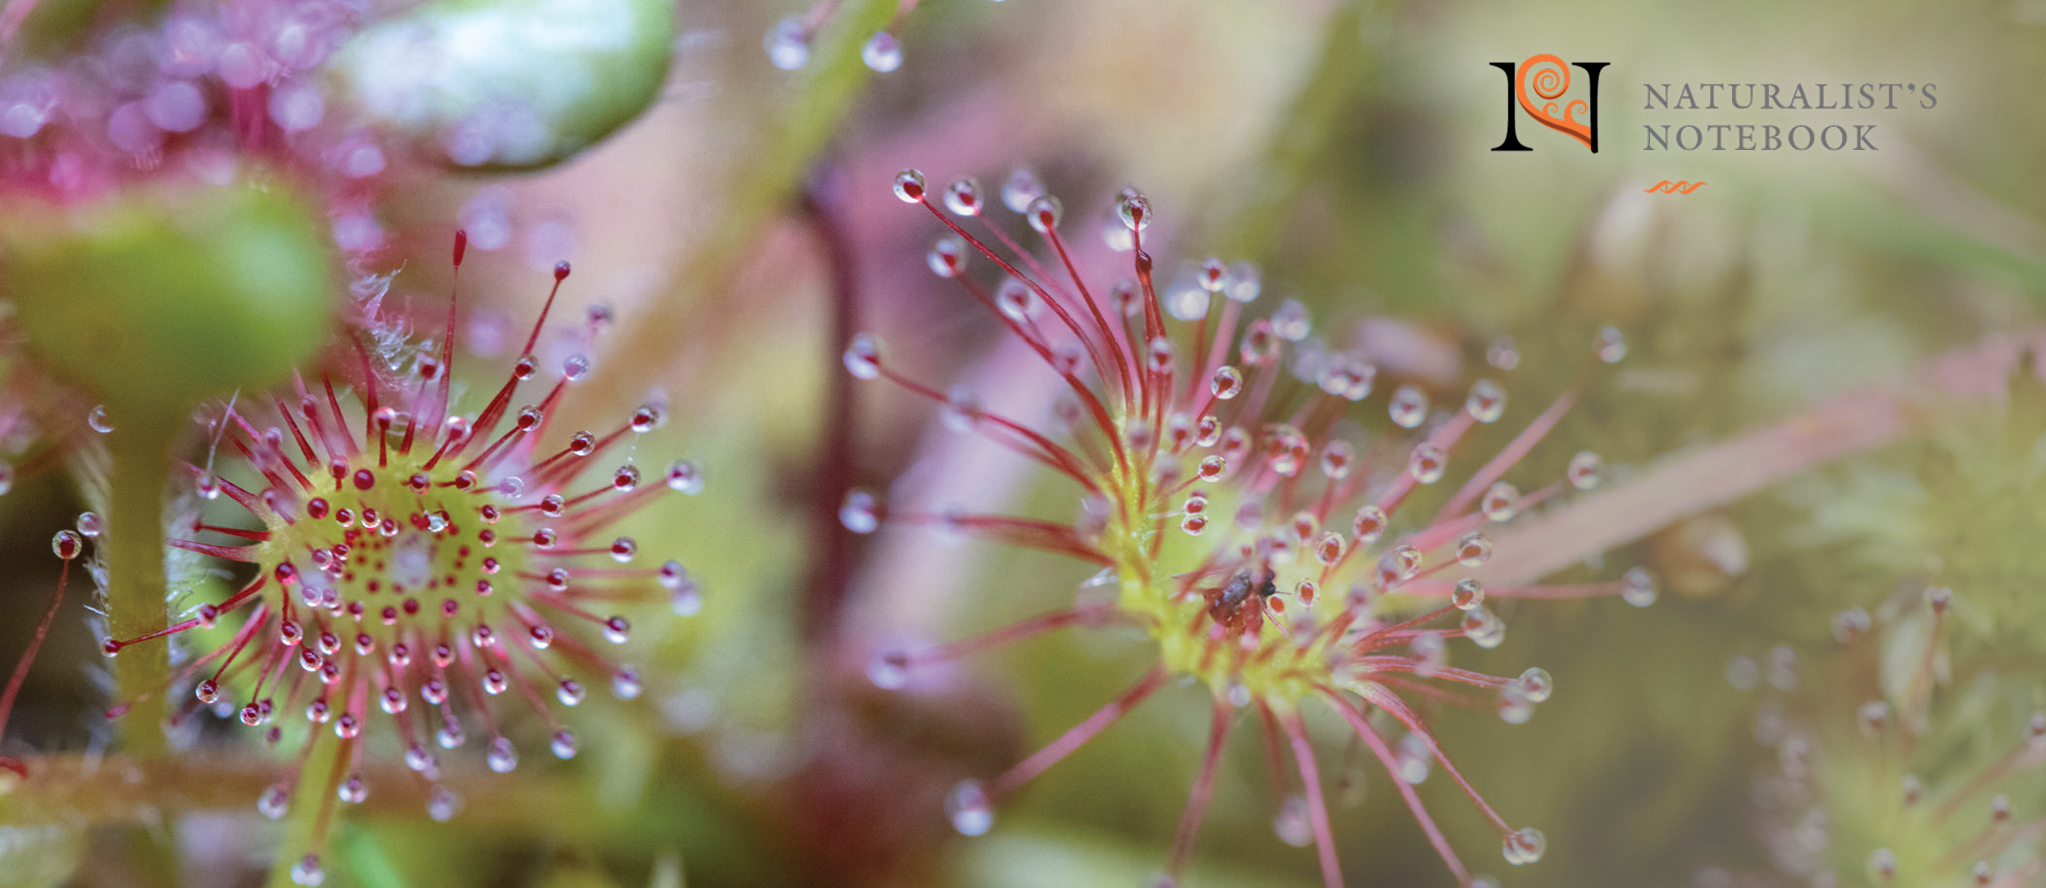 Close-up view of sundew